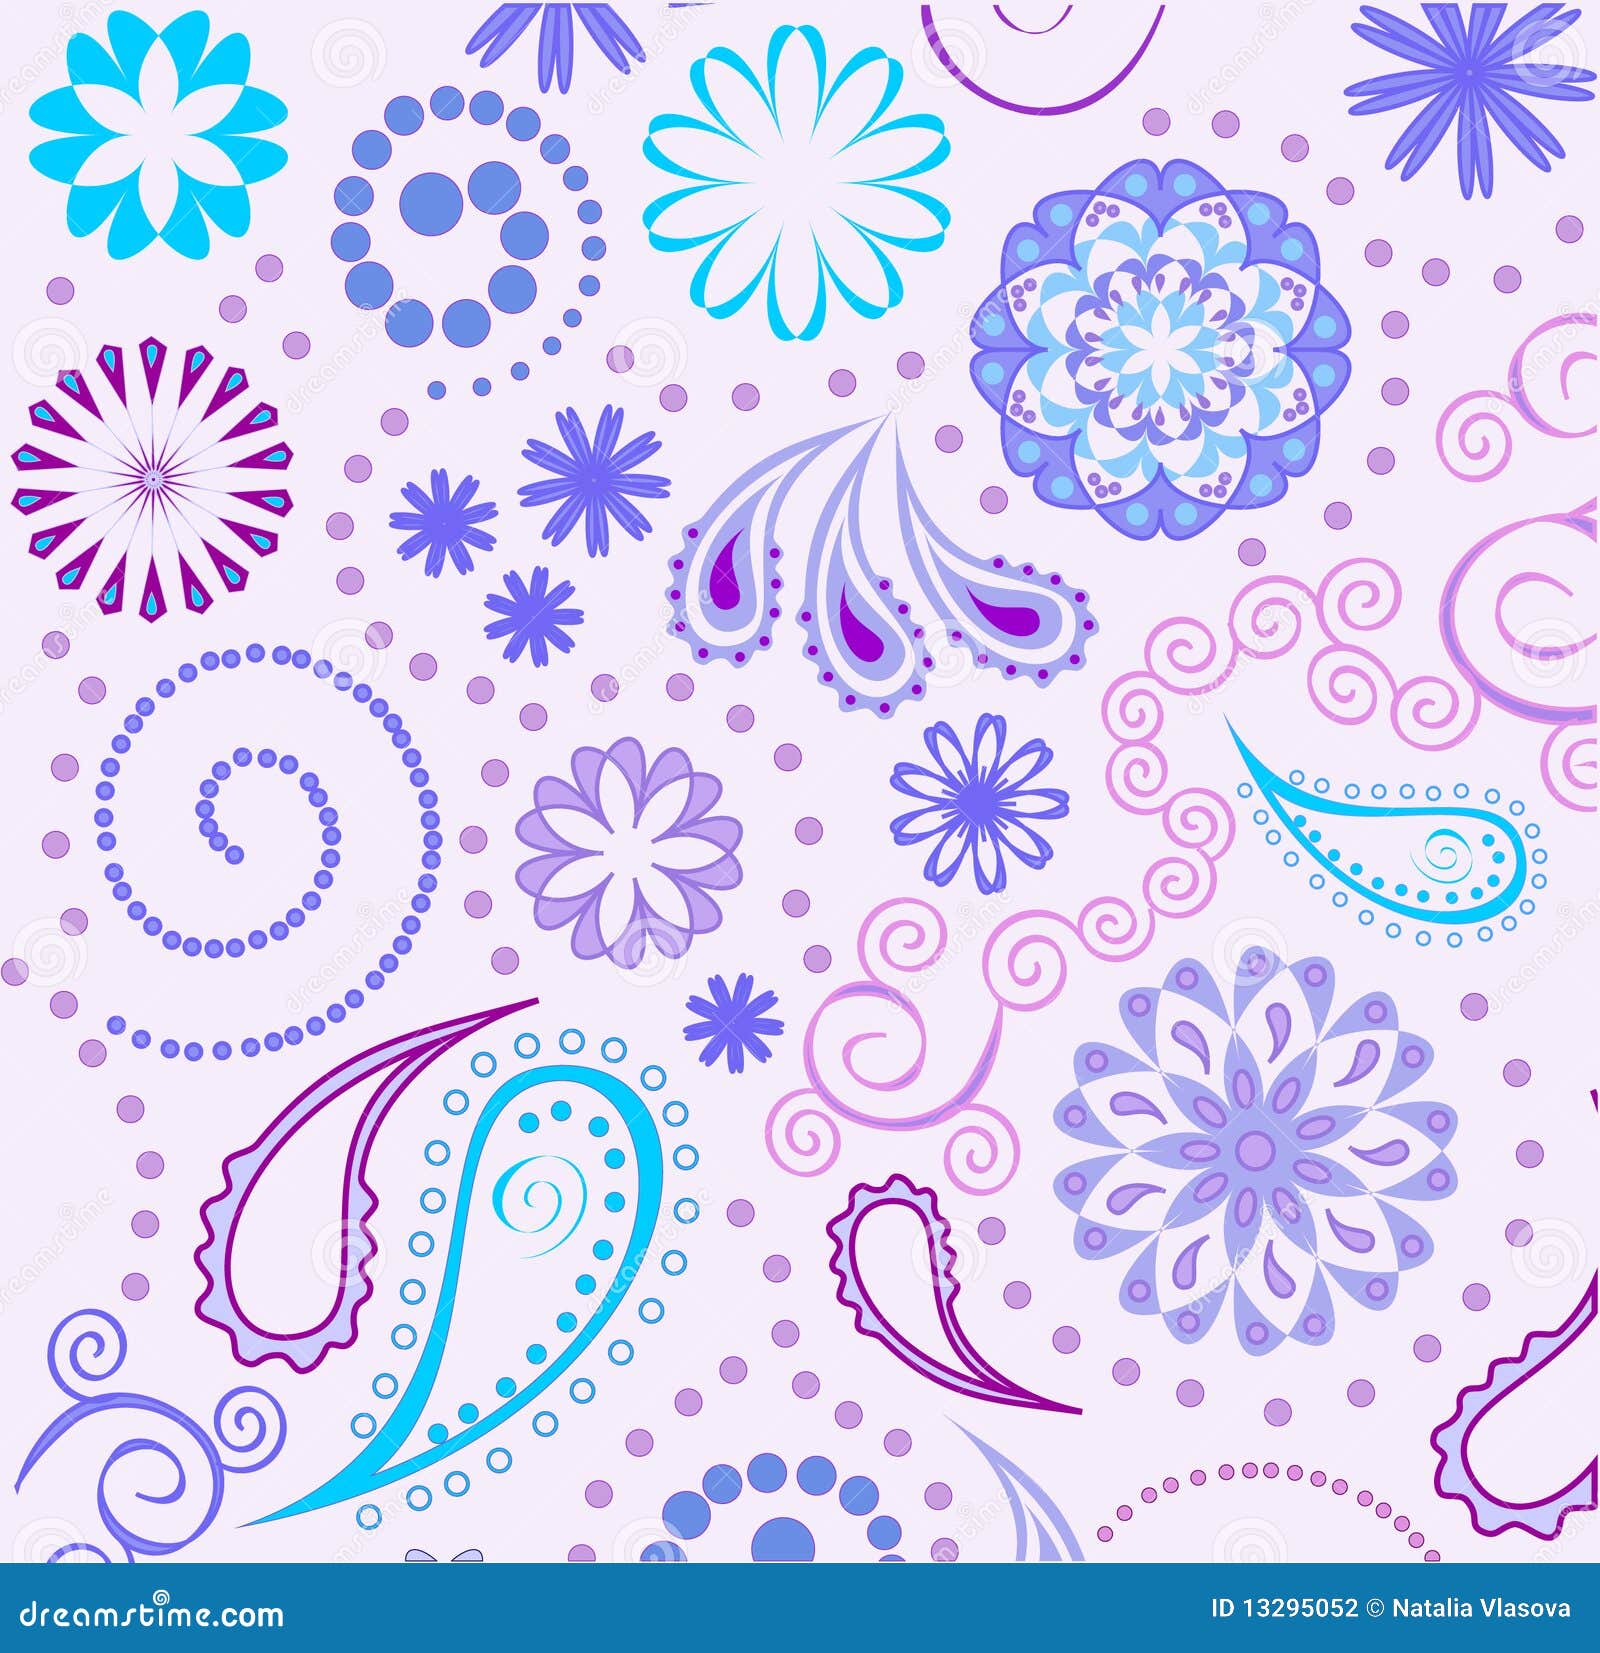 Flowers and paisley stock vector. Illustration of flower - 13295052